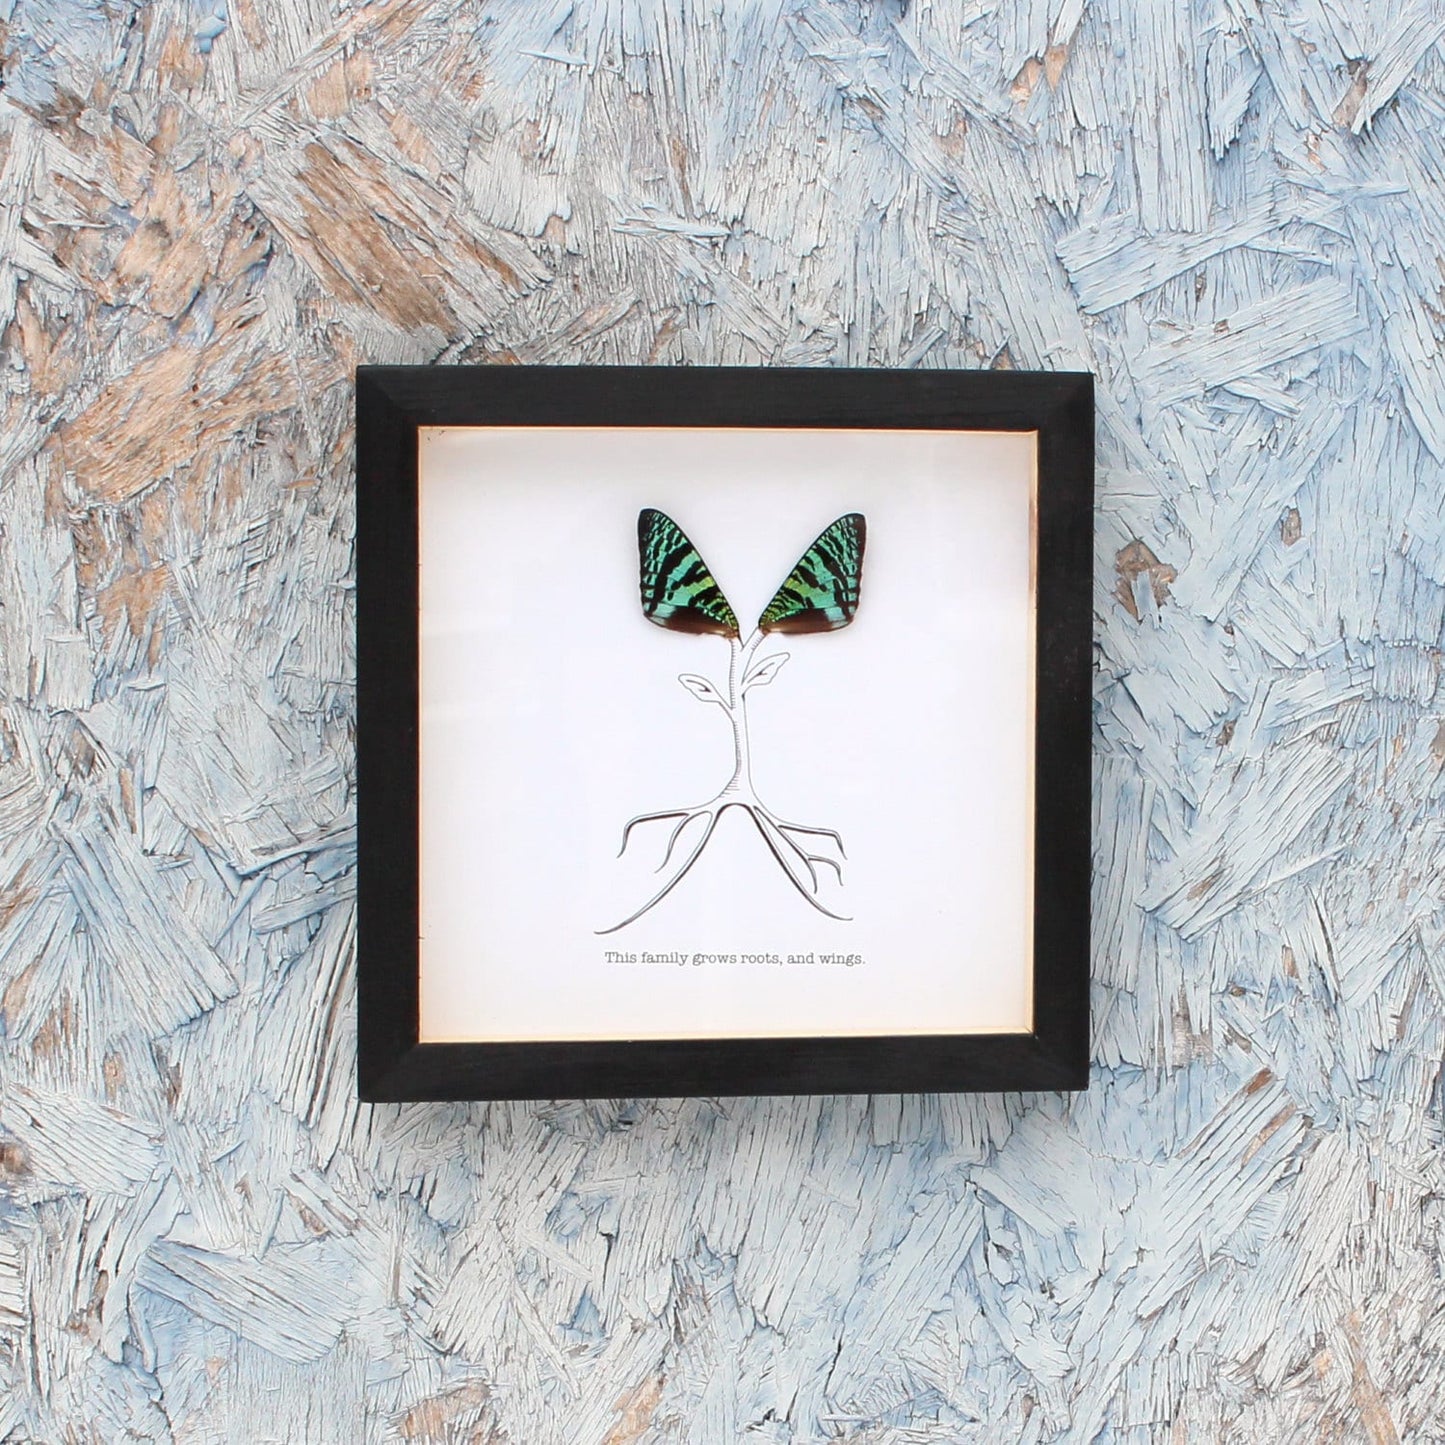 Roots and Wings Real Butterfly Wing Framed Art 'This Family Grows Roots and Wings' Ethically Sourced Made in MN USA - Holly Ulm - Isms